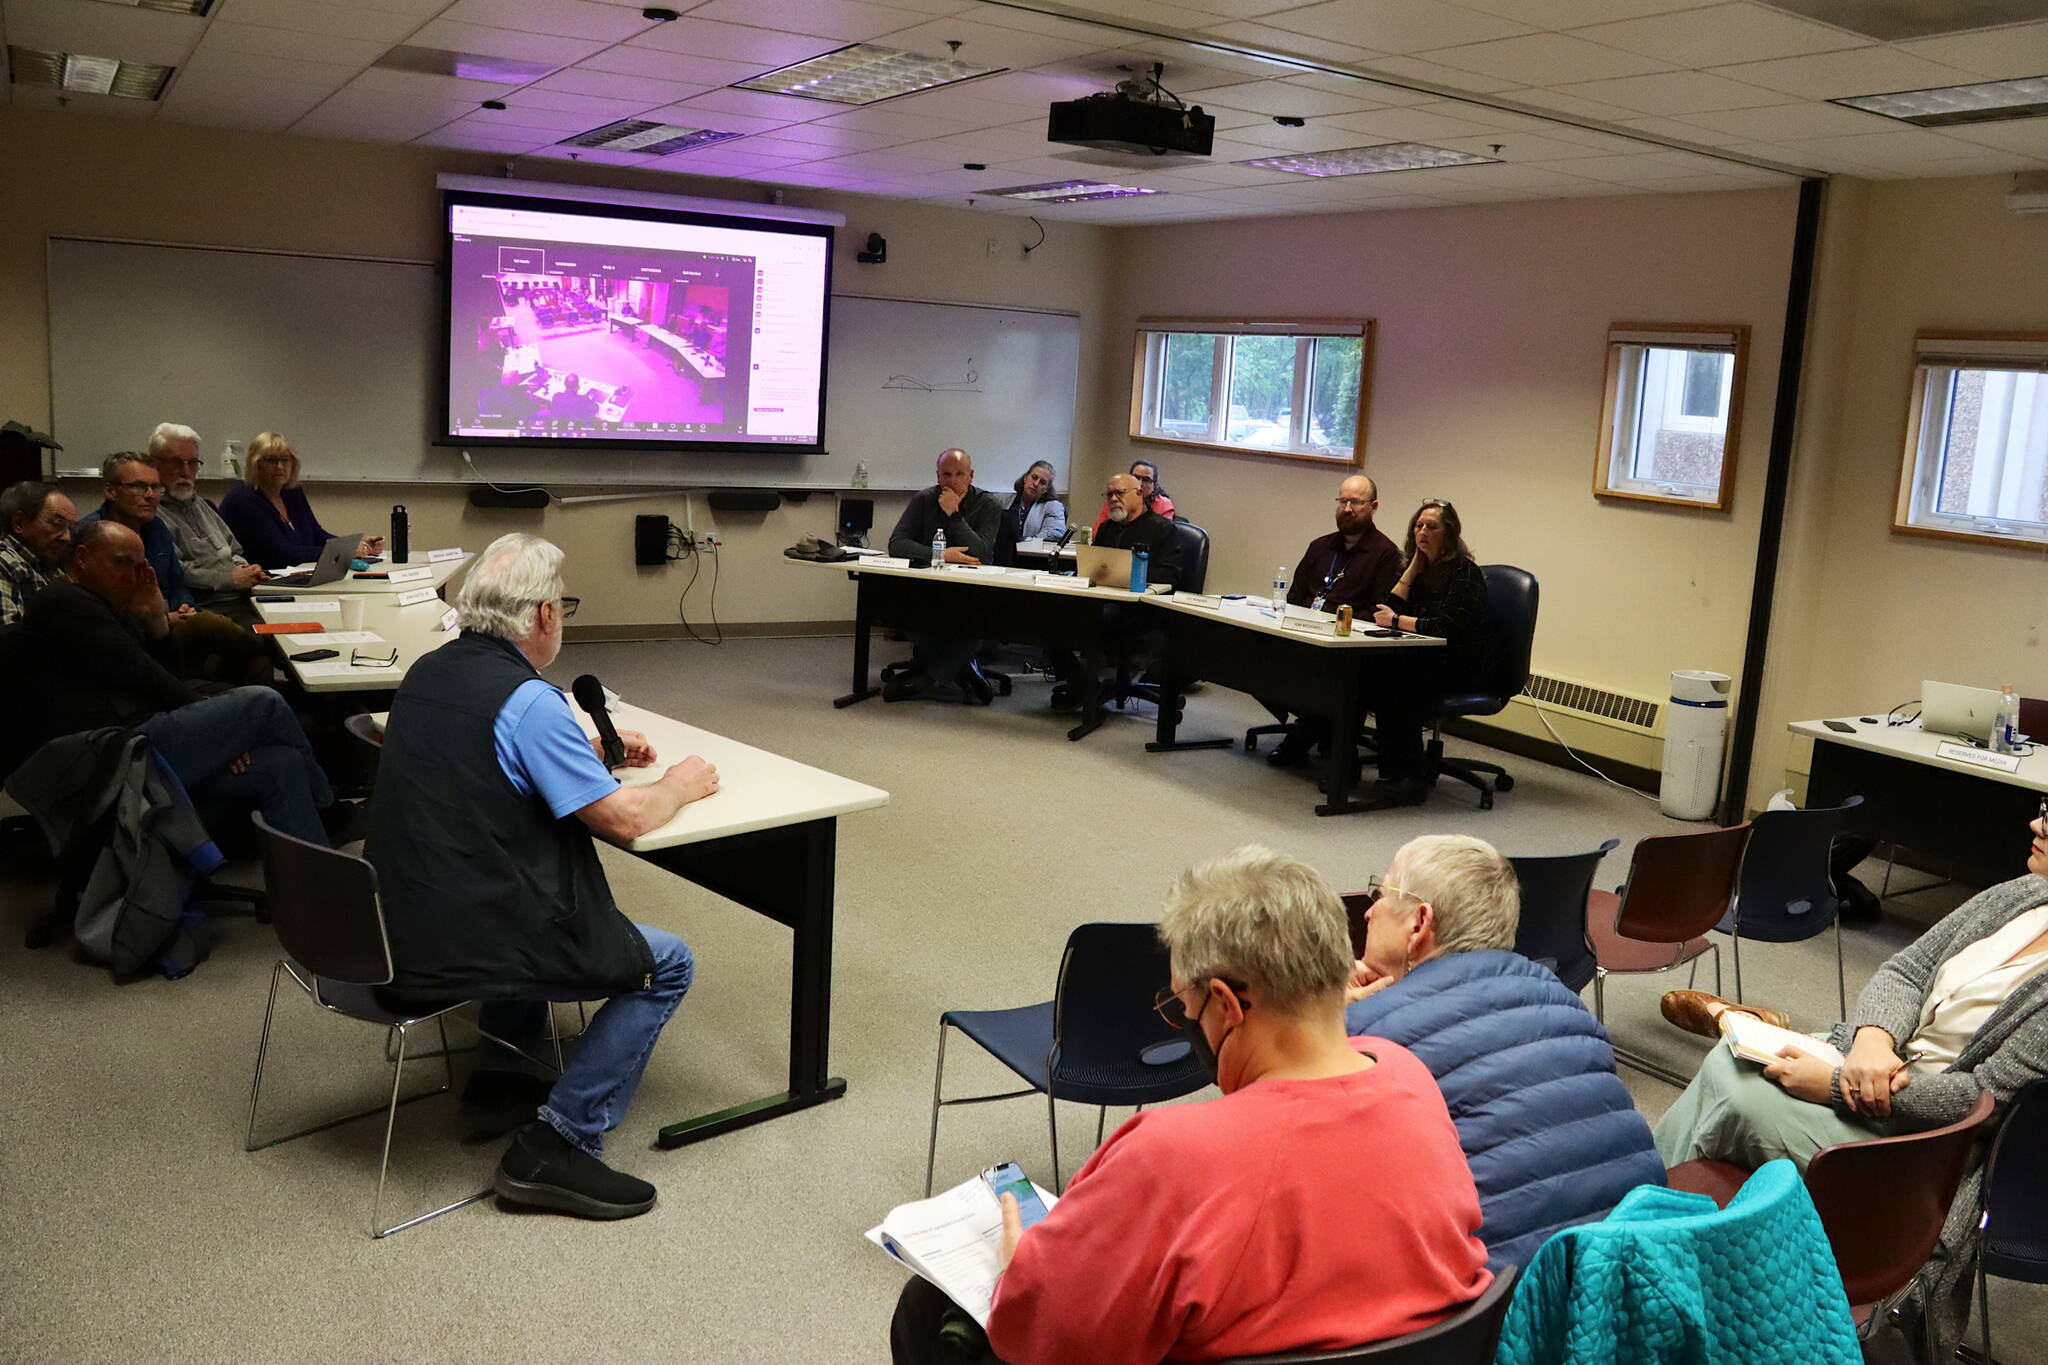 Leaders at Bartlett Regional Hospital listen to comments from residents during a forum Monday about proposed cuts to some services. (Mark Sabbatini / Juneau Empire)